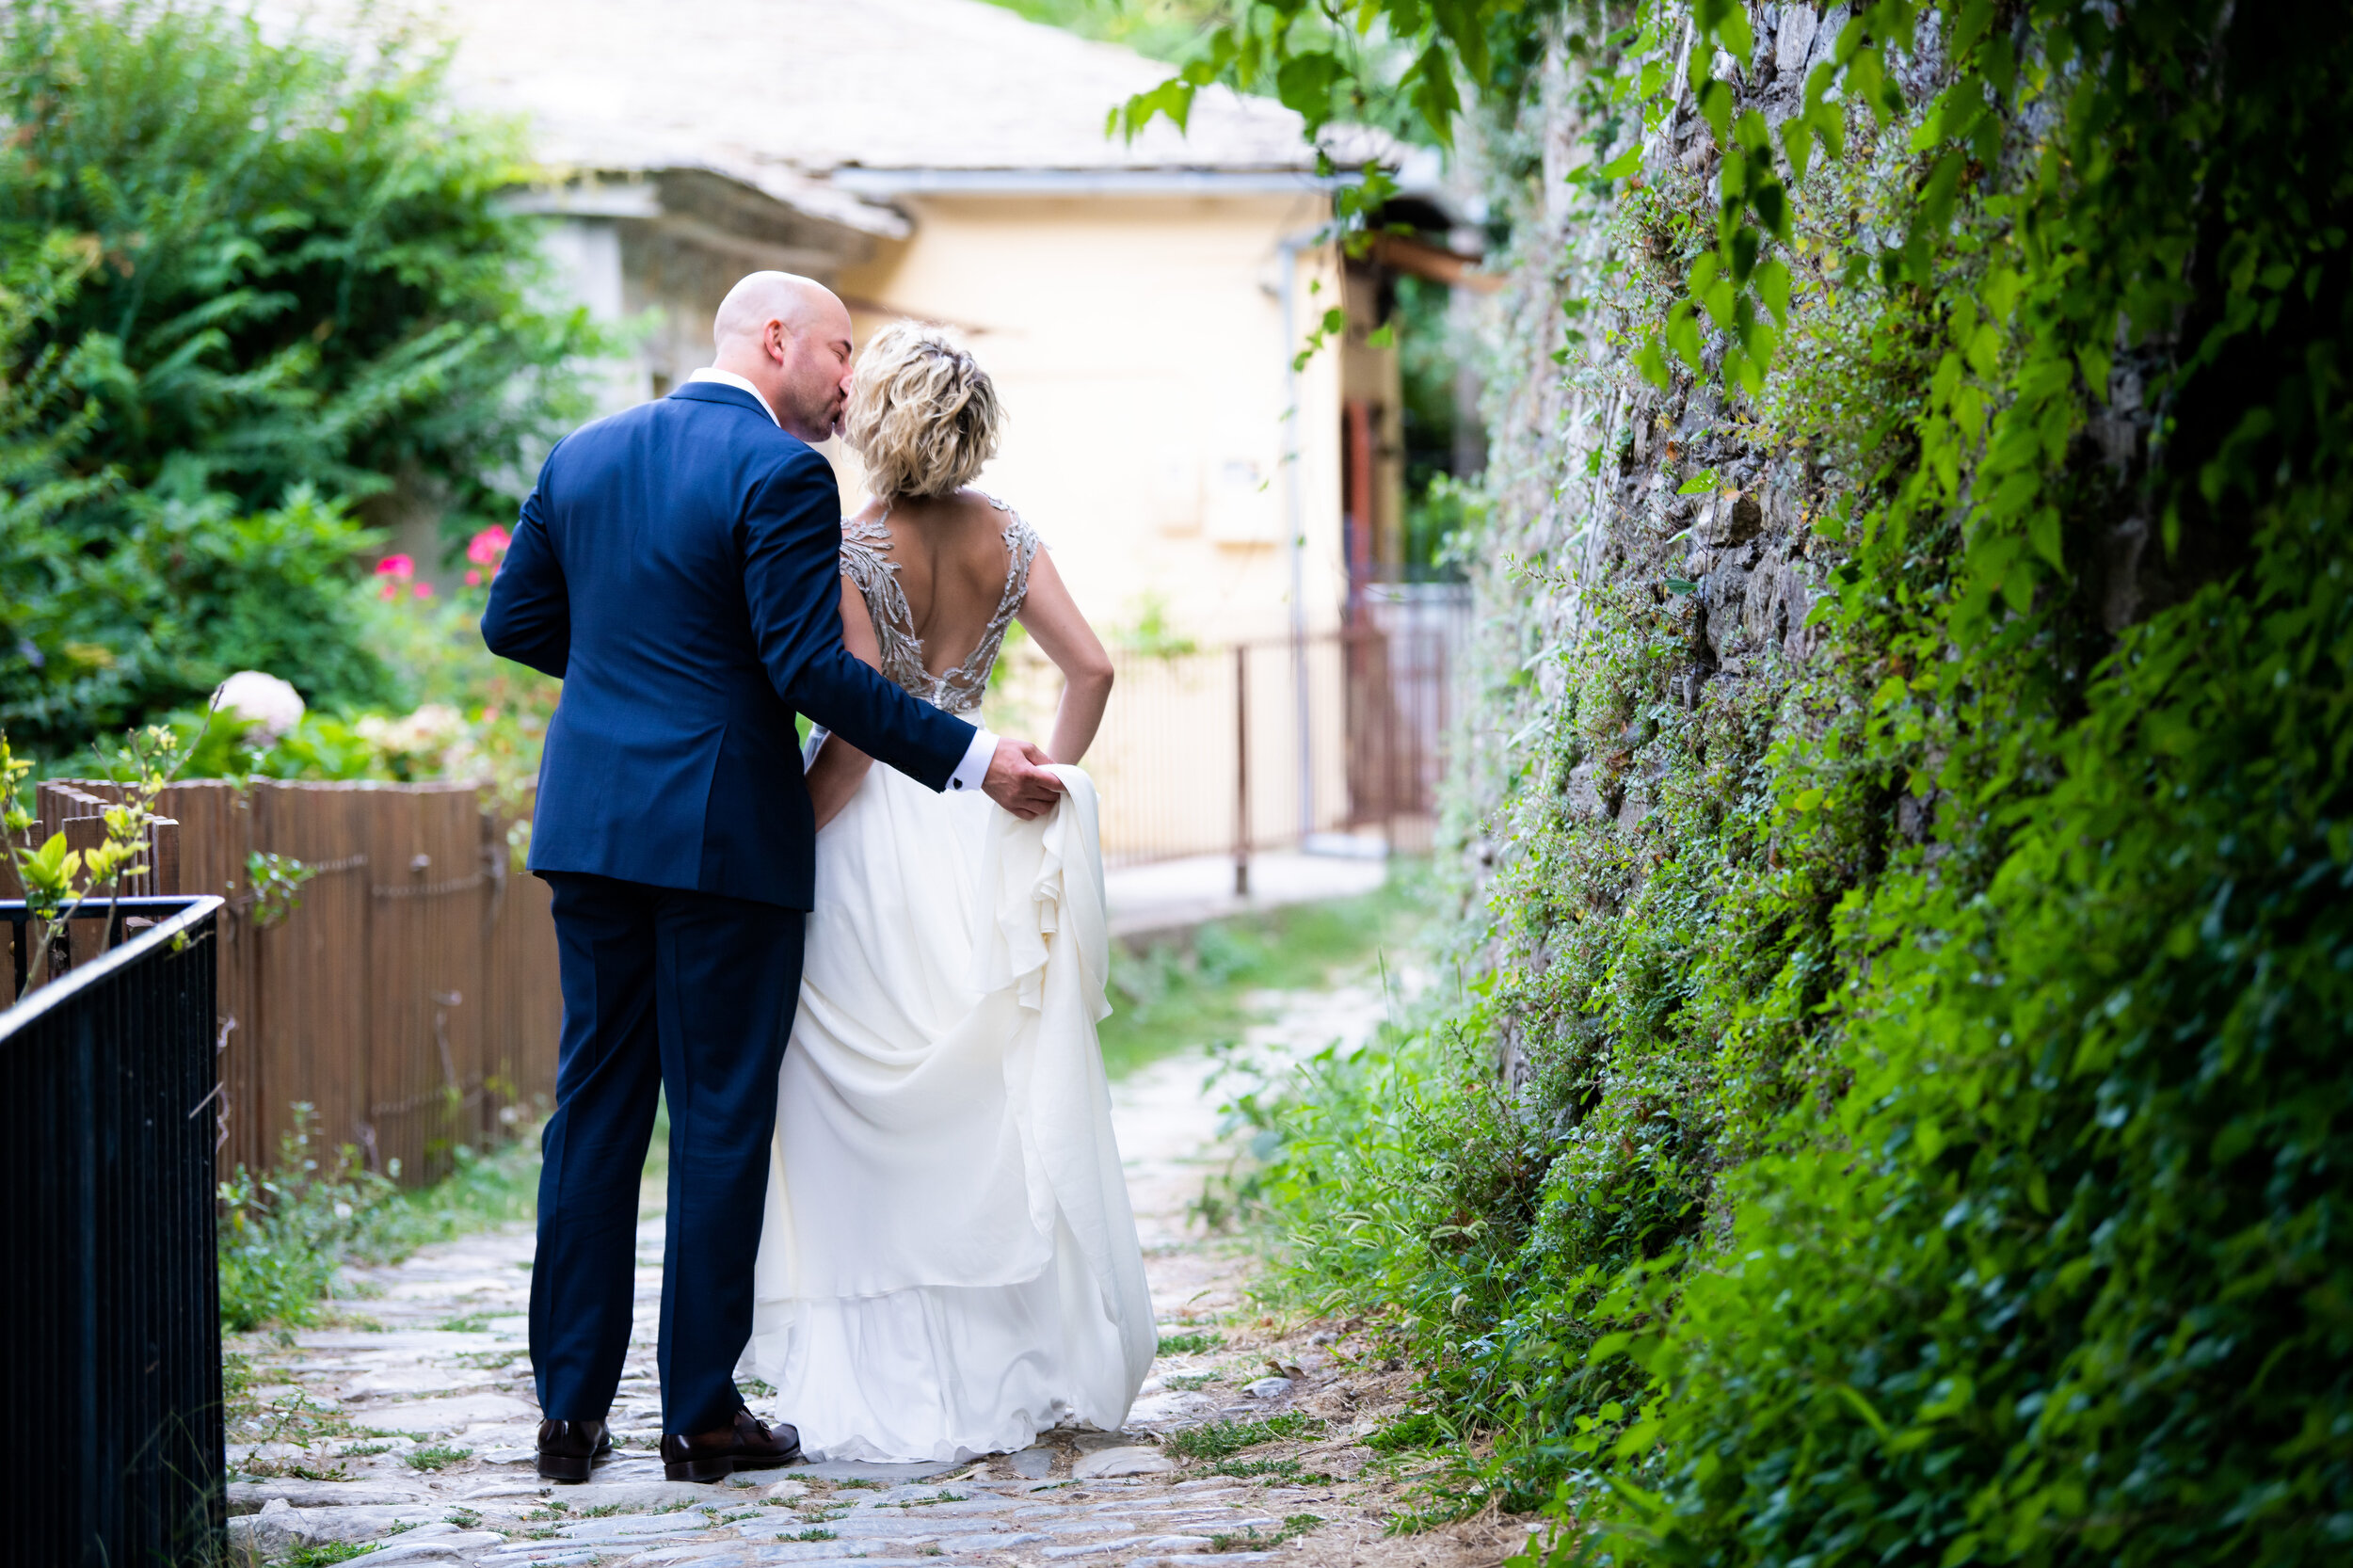 Candid wedding day portrait of the bride and groom:  destination wedding photo at the Lost Unicorn Hotel, Tsagarada, Greece by J. Brown Photography.